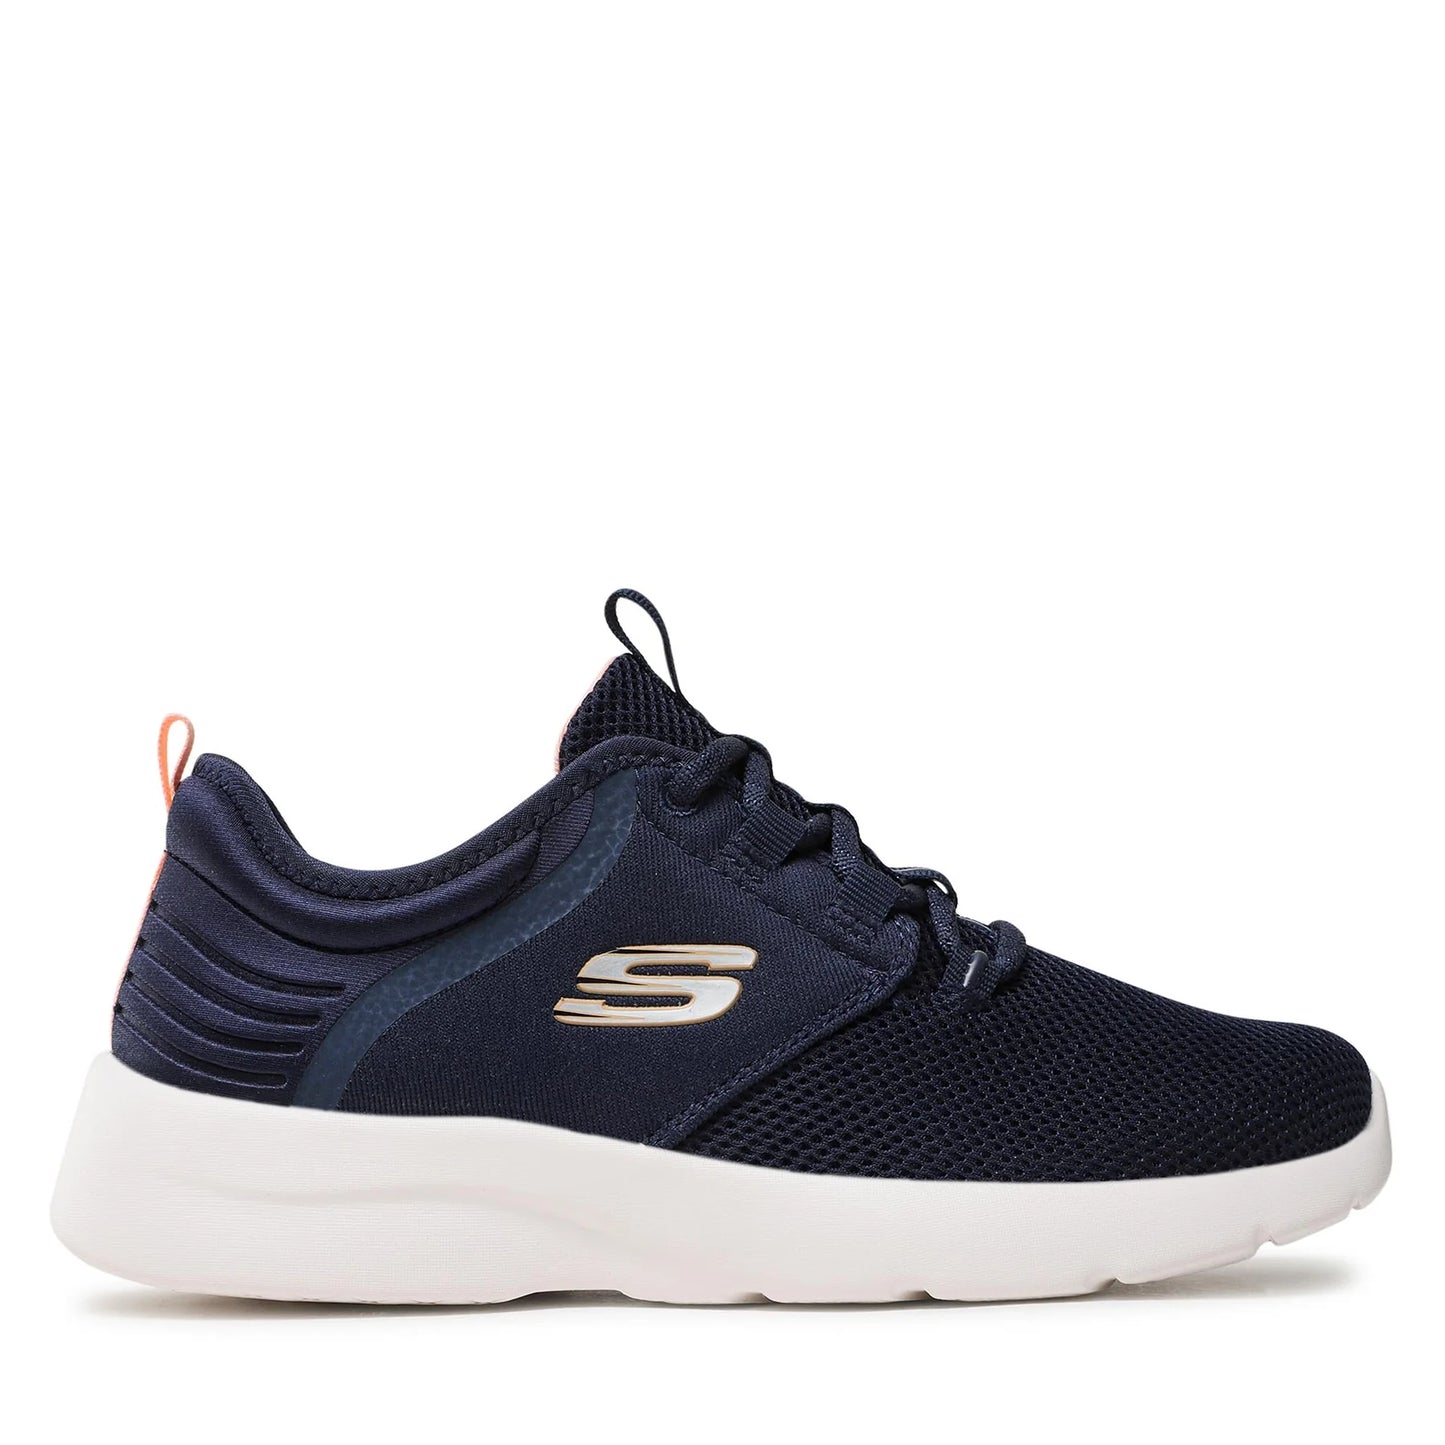 Skechers Dynamight 2.0 - Momentous. Mujer